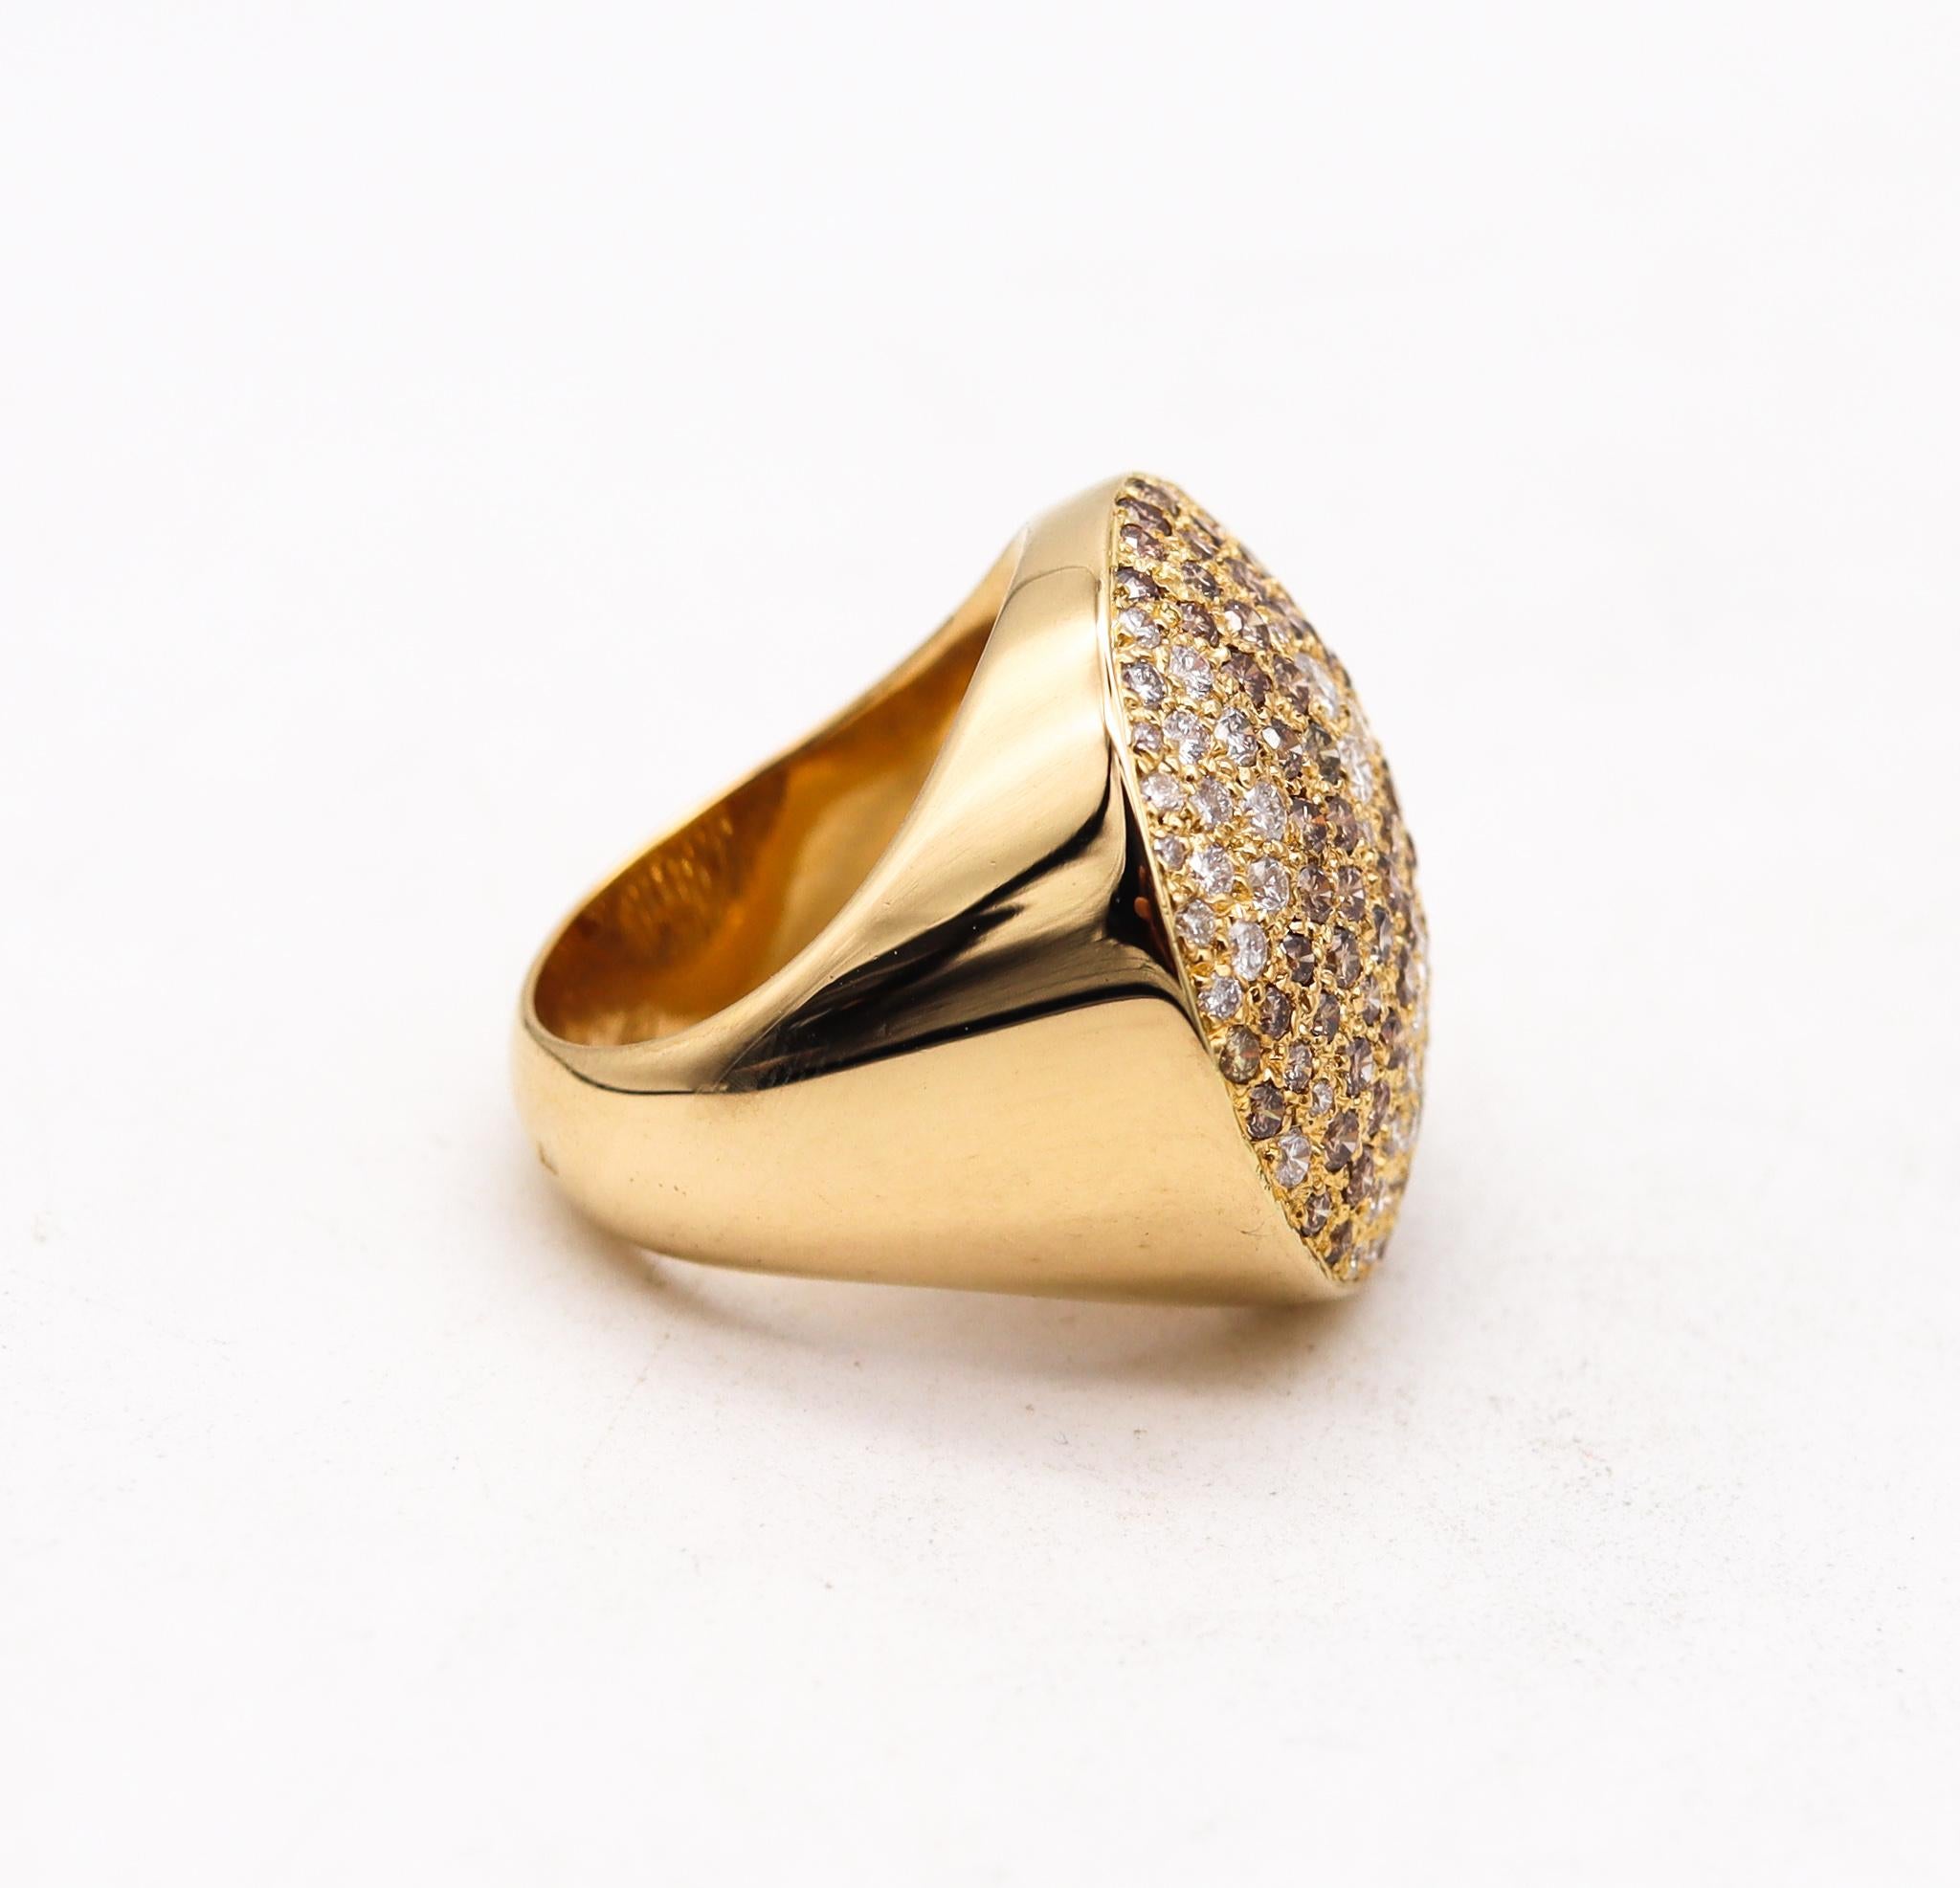 Modern Cartier Paris Jeton Sauvage Cocktail Ring 18Kt Yellow Gold with 3.18 Ctw Diamond For Sale